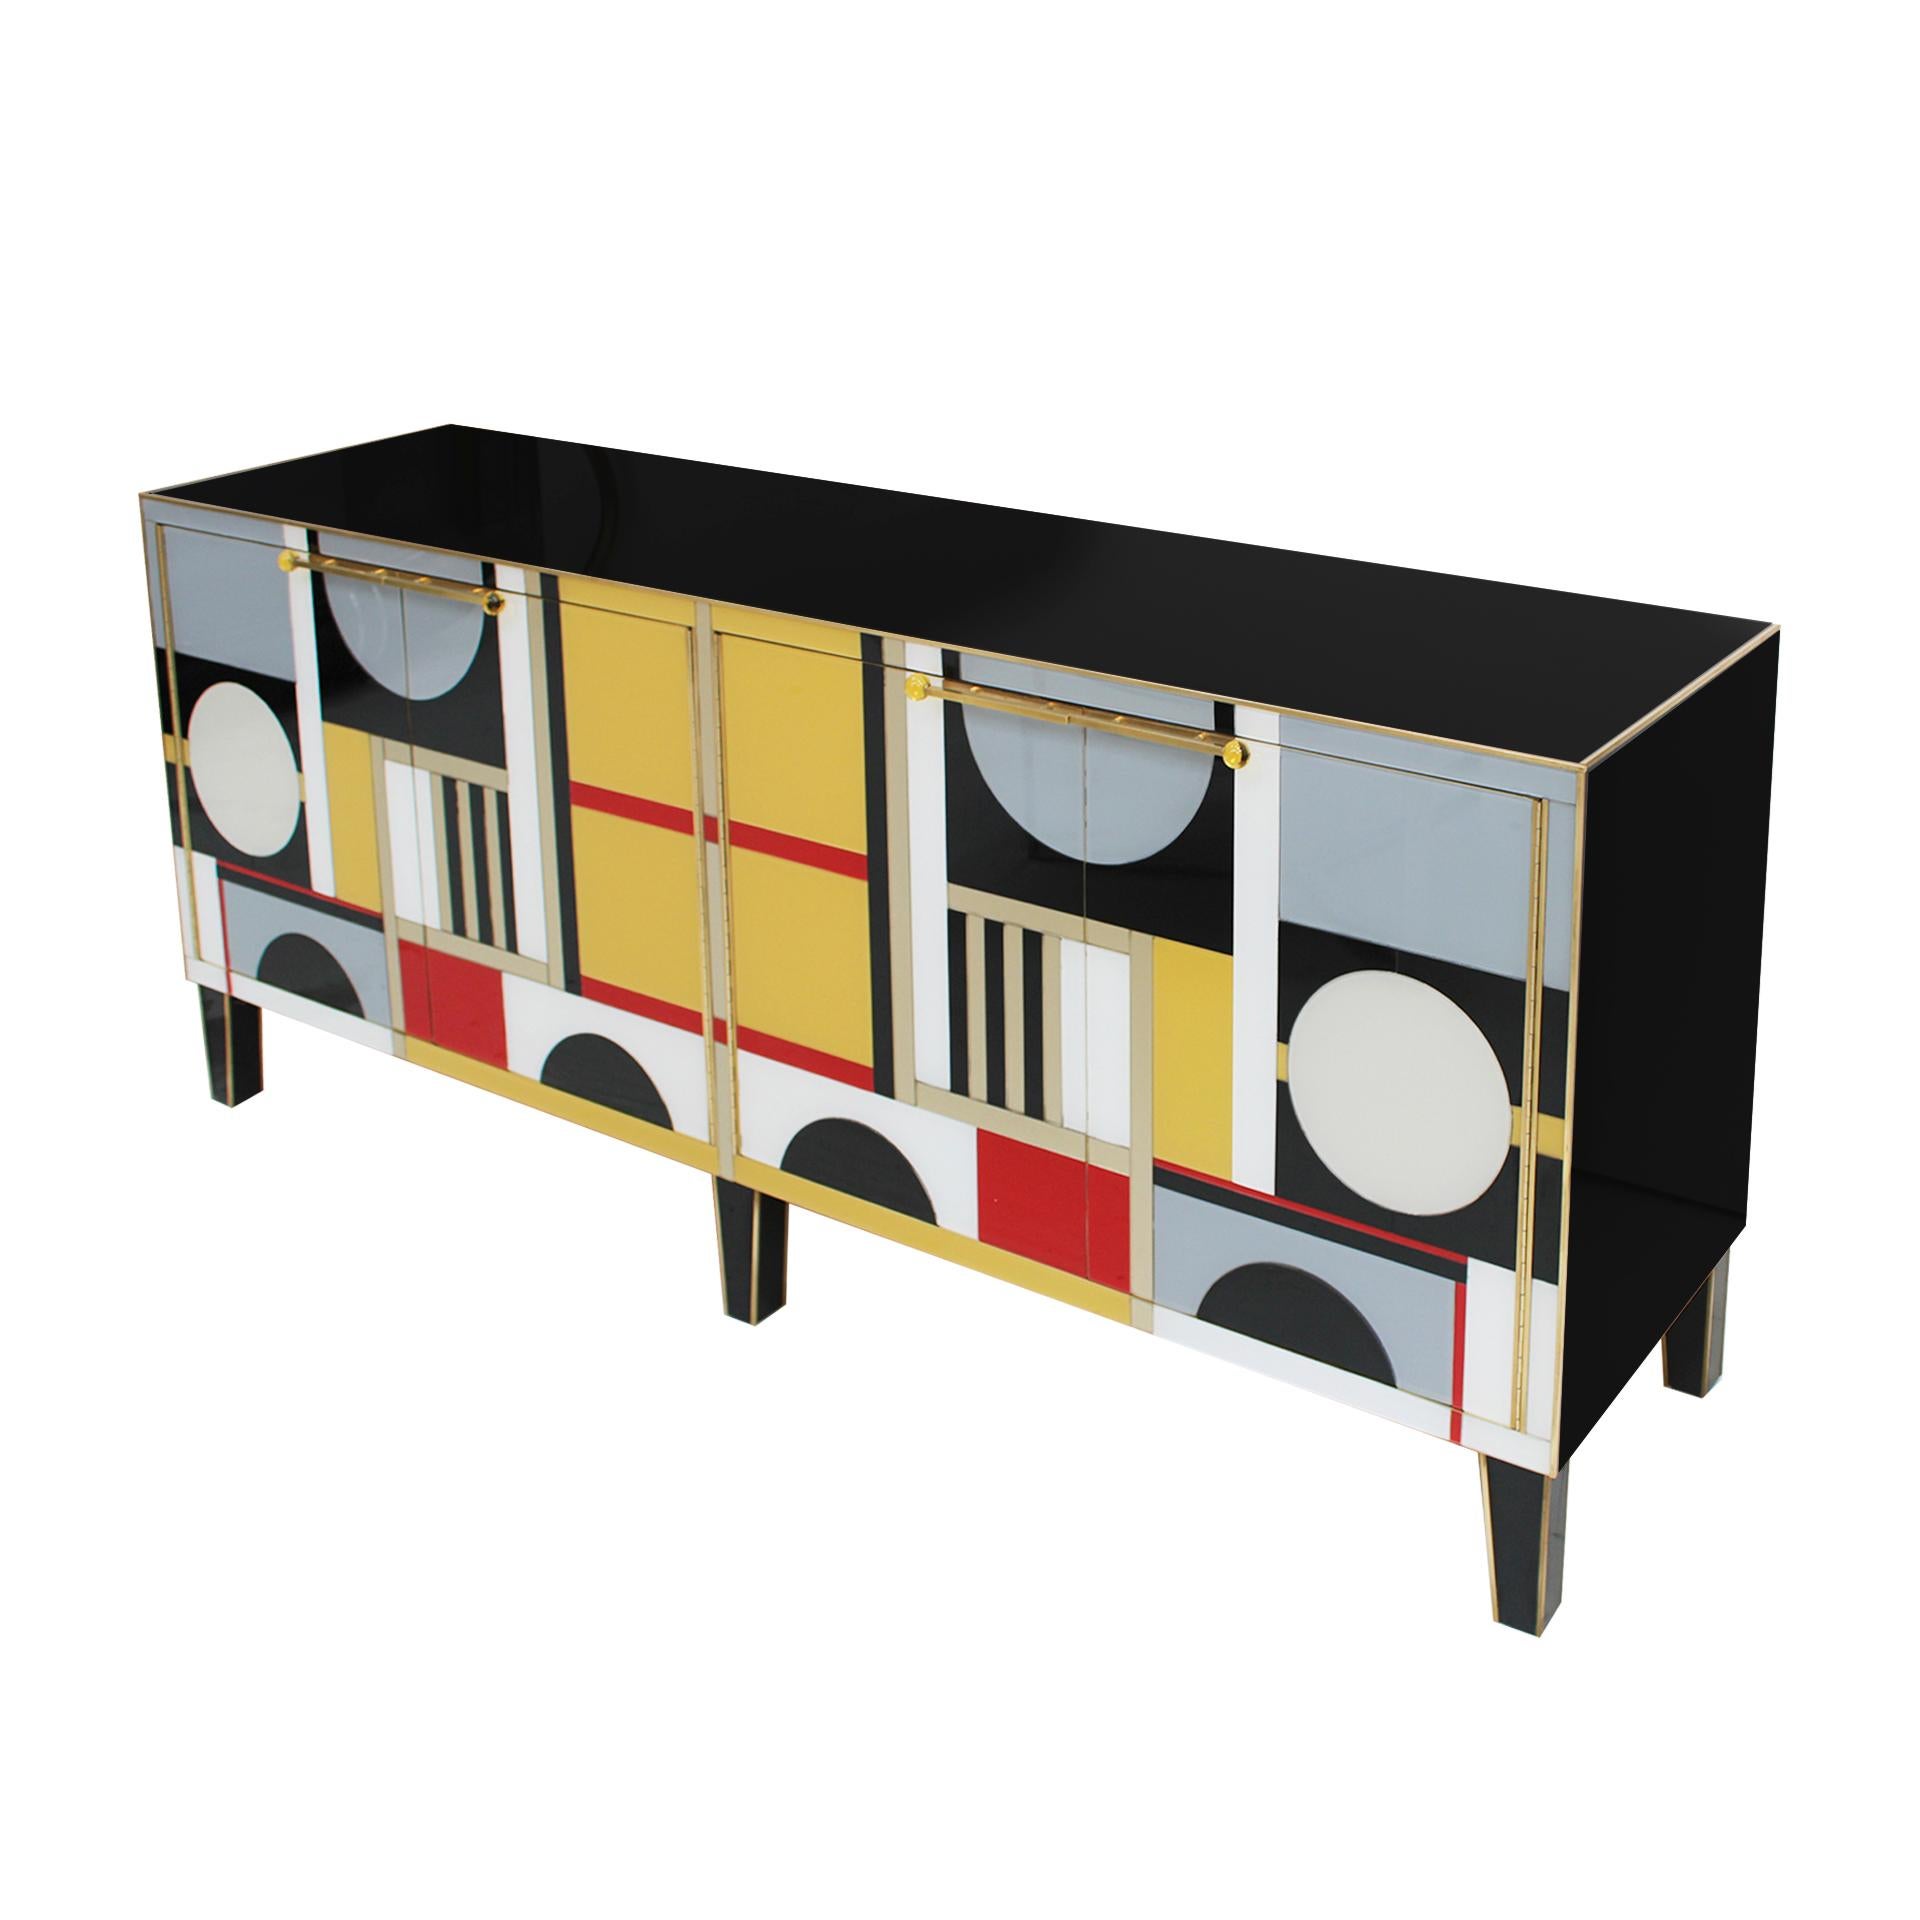 A wonderful and very elegant contemporary sideboard with four doors made with an original solid wood structure from the 50s. Structure made of solid wood covered in colored glass , playing a geometric movement on the surface. Conical feet made of